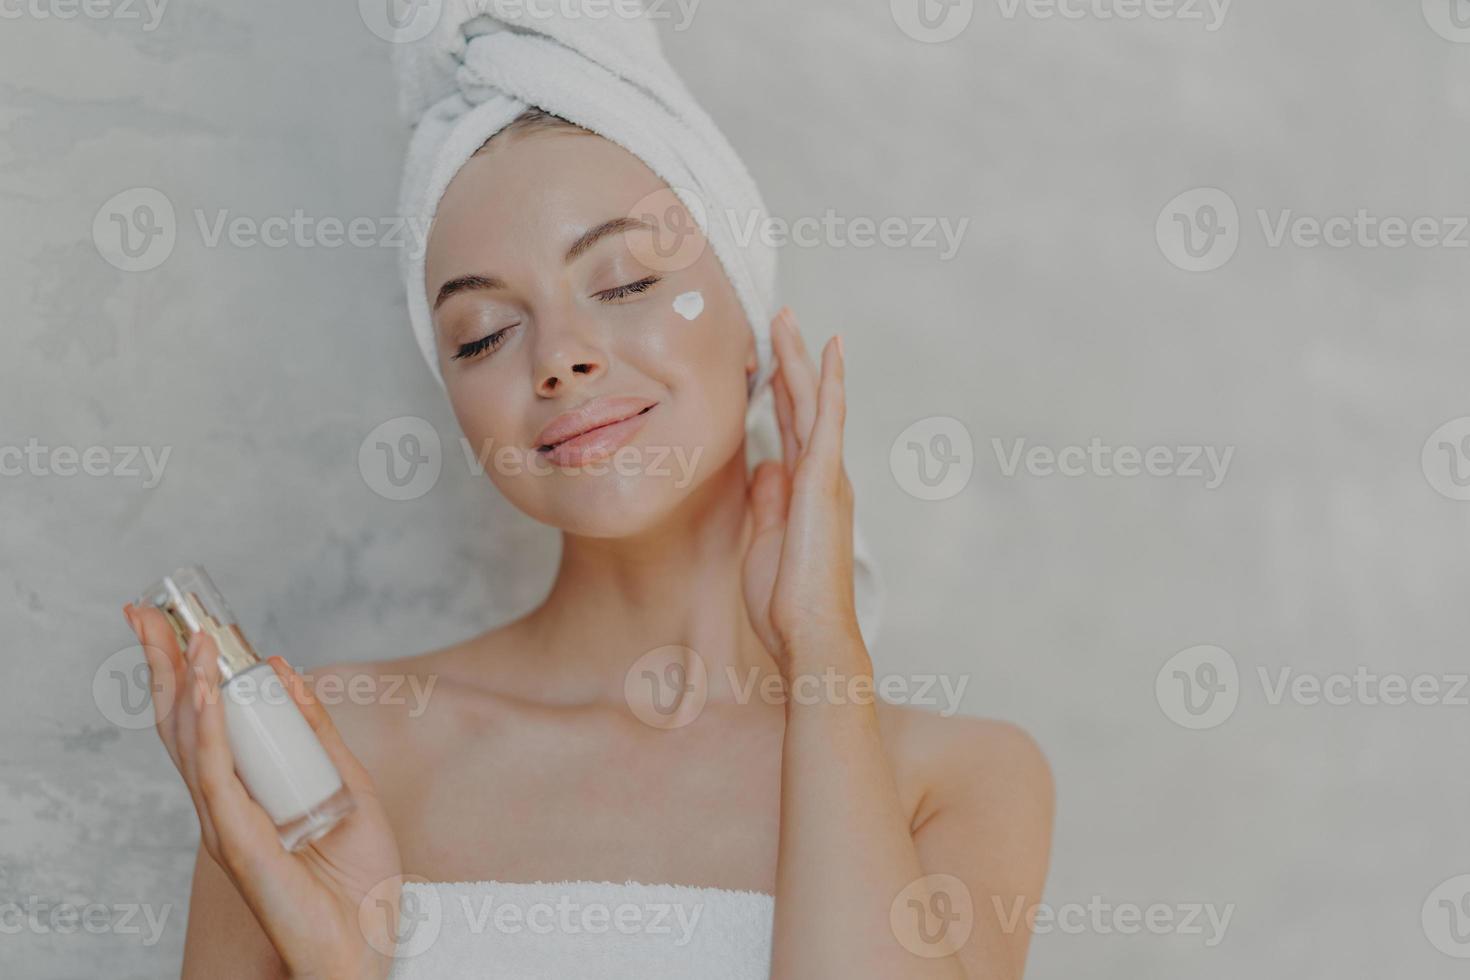 Headshot of pleased attractive woman applies face lotion, satisfied with new cosmetic product, keeps eyes closed, touches soft skin after bath, has well cared complexion, poses against grey wall photo